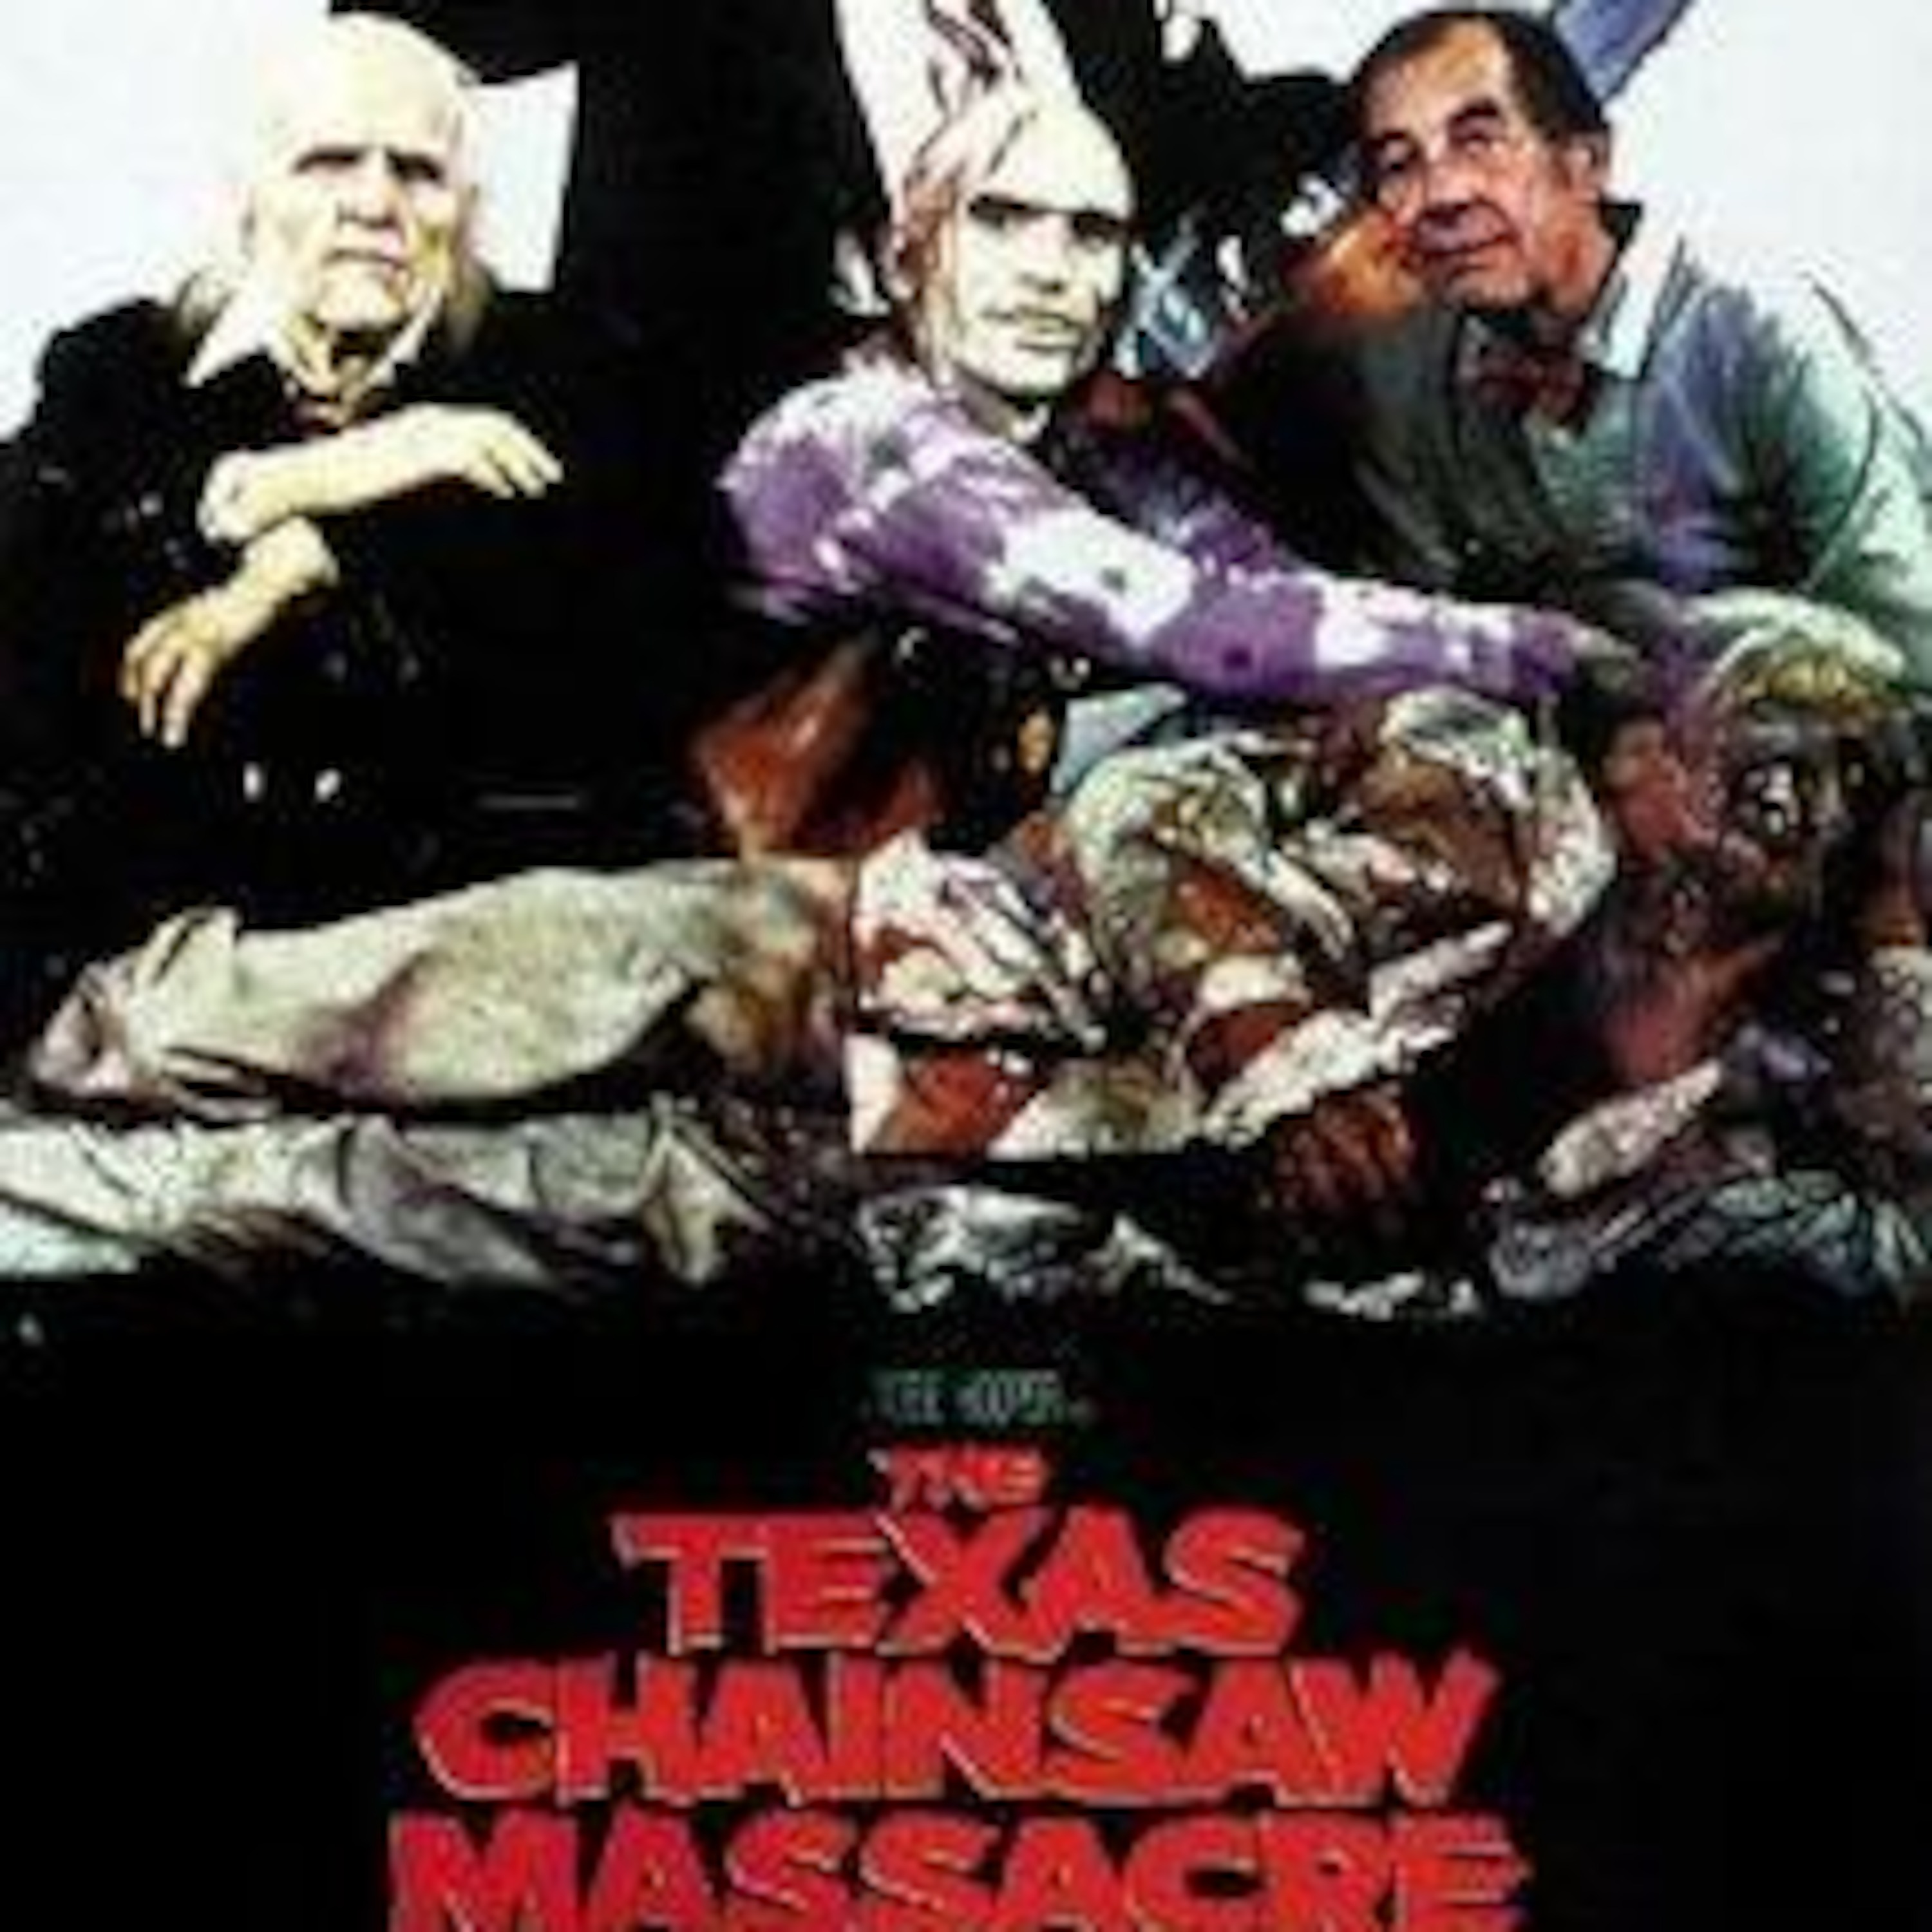 actors in the movie the texas chain saw massacre